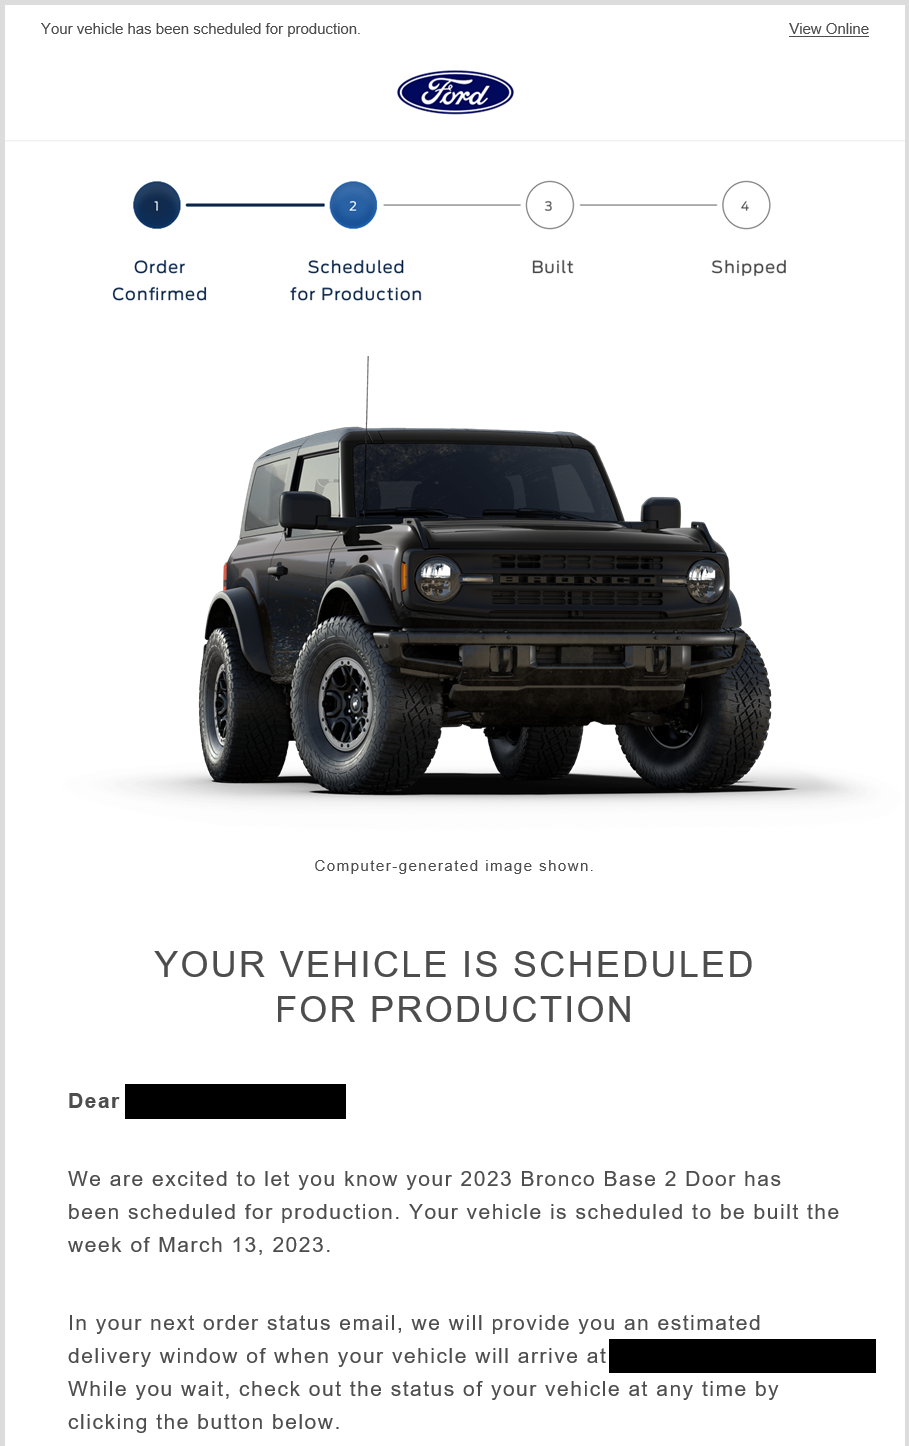 Ford Bronco 📬 Just got scheduled email today Jan 19! Post yours! BEBF6B6B-8D70-4D00-ABA9-68327EC0C7E0